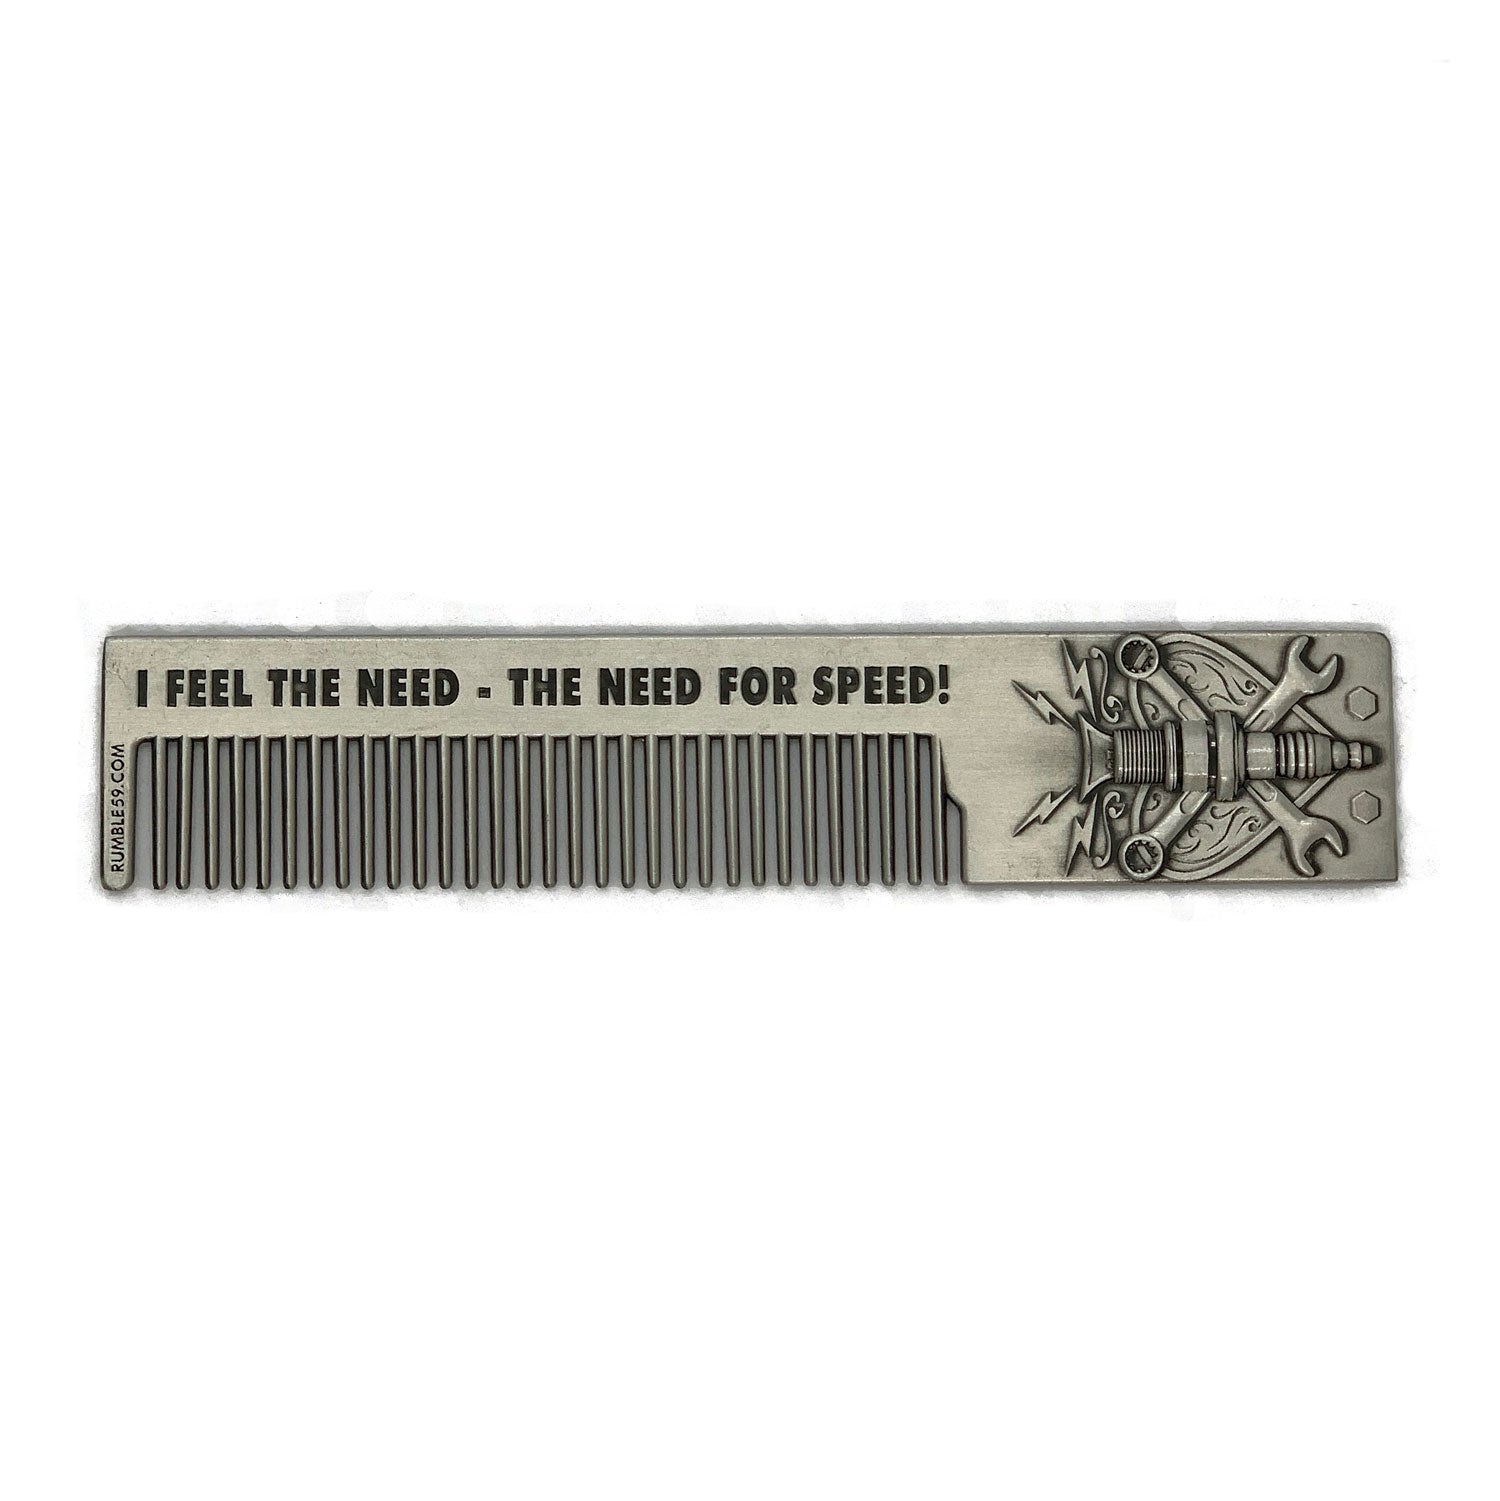 Schmiere 3D Metal Comb - Need For Speed 15cm - Orcadia